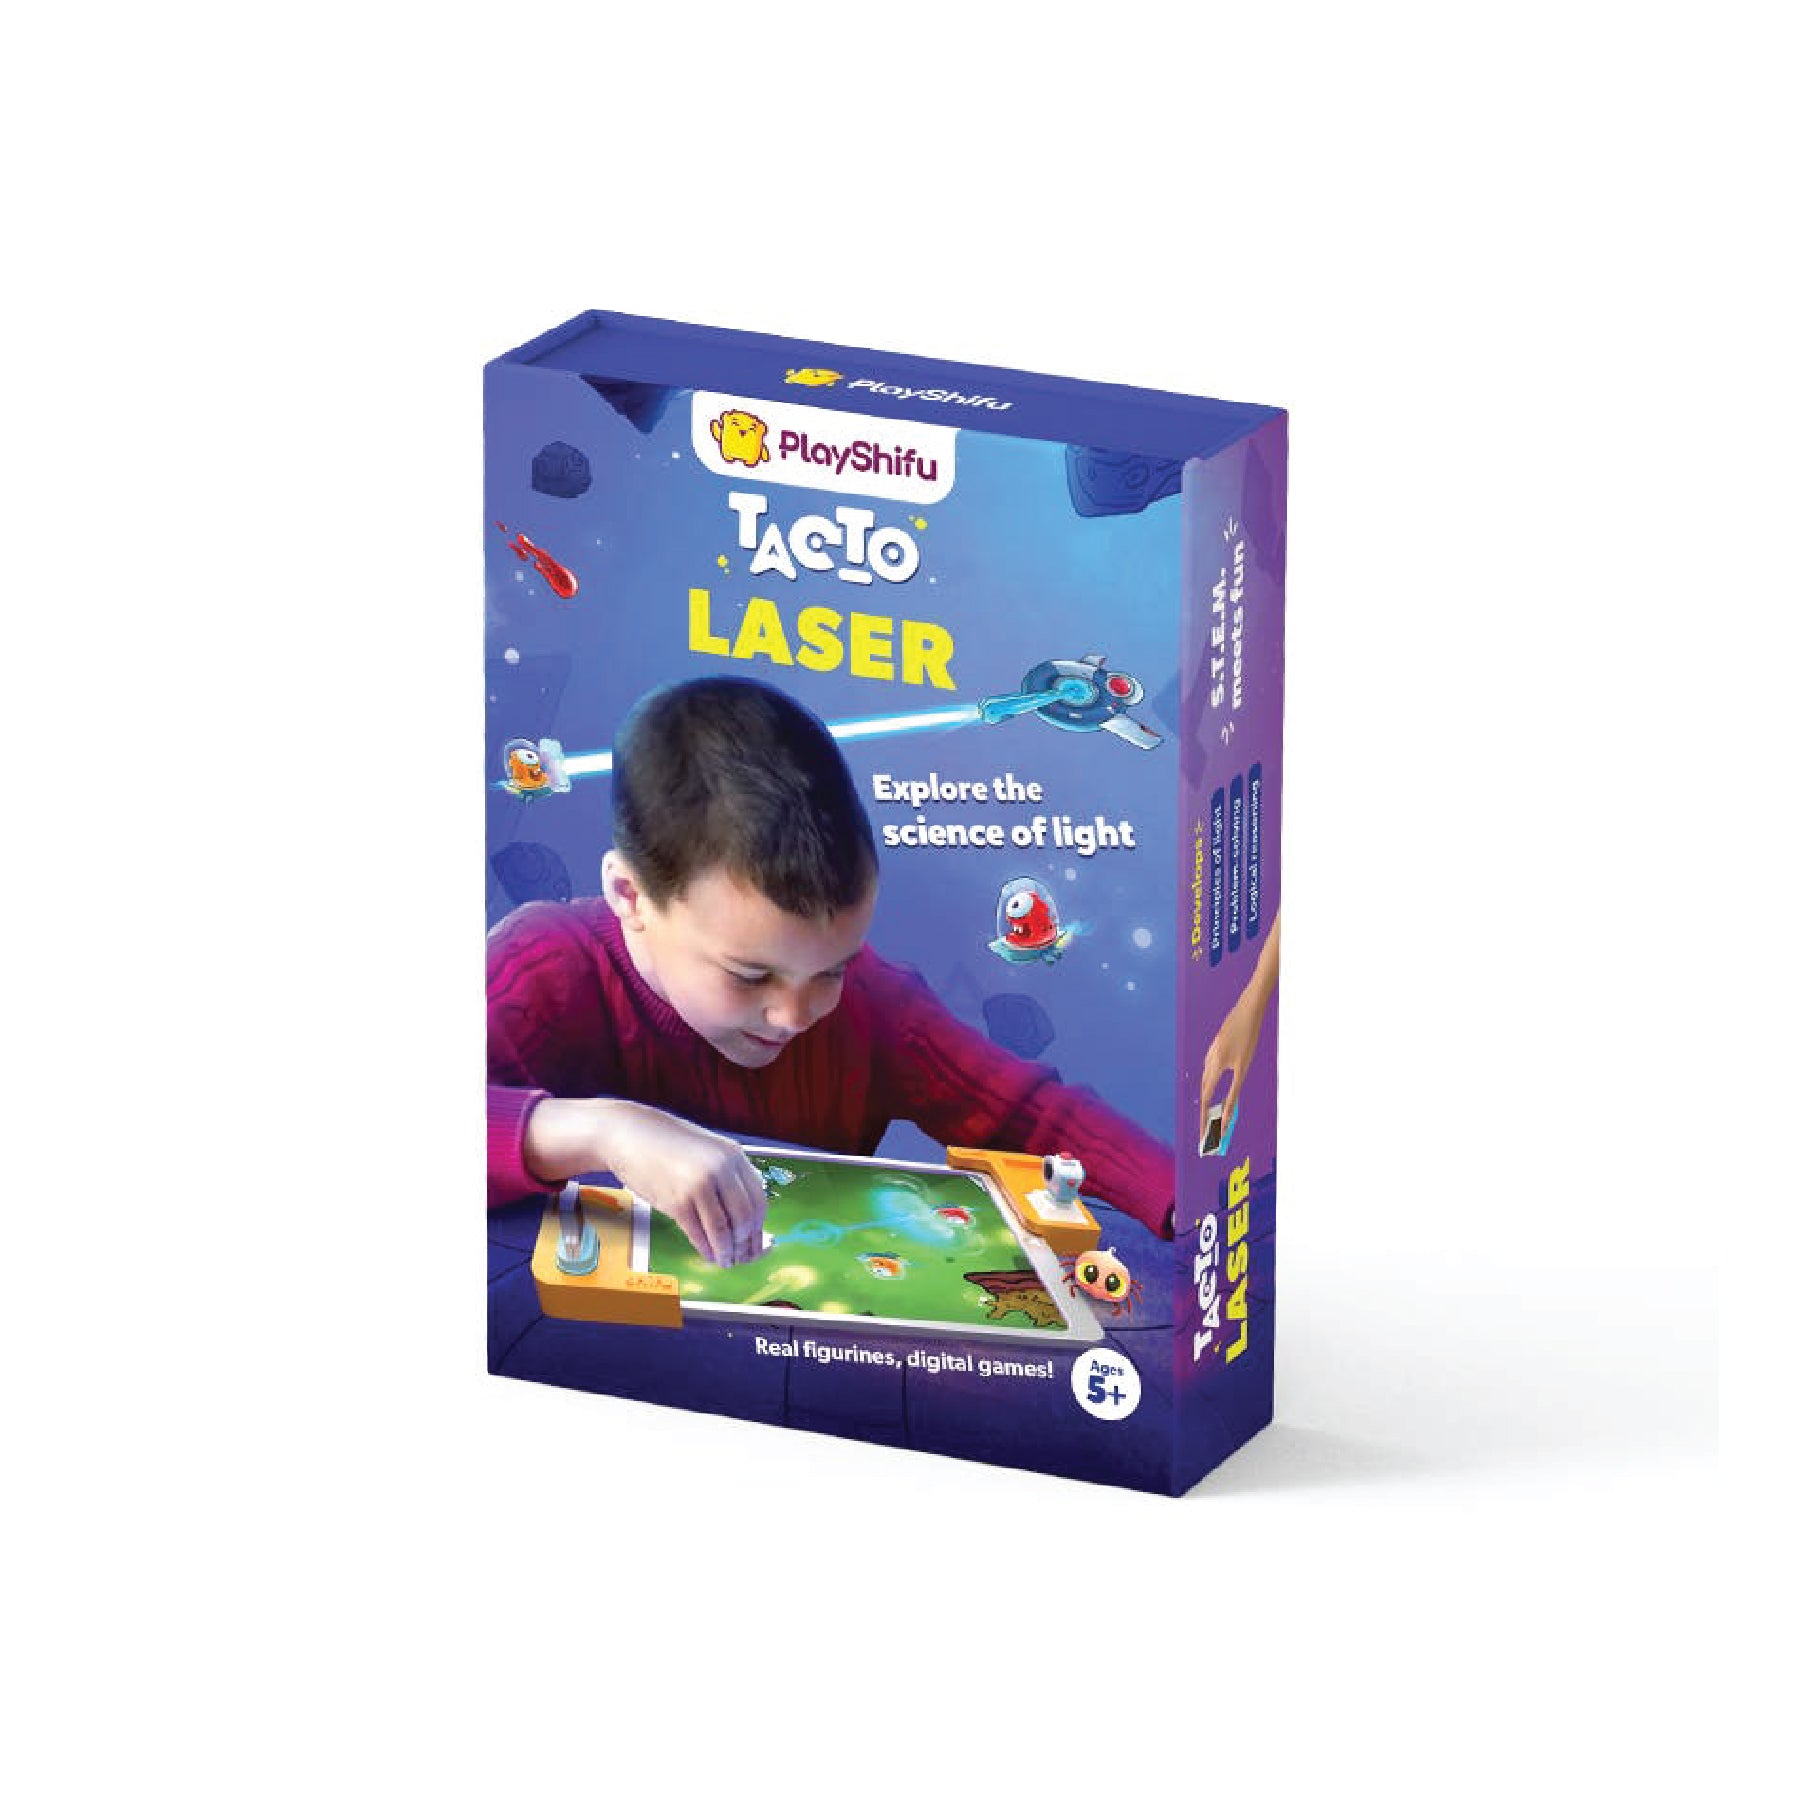 Tacto Laser by Playshifu - iStore Pre-owned